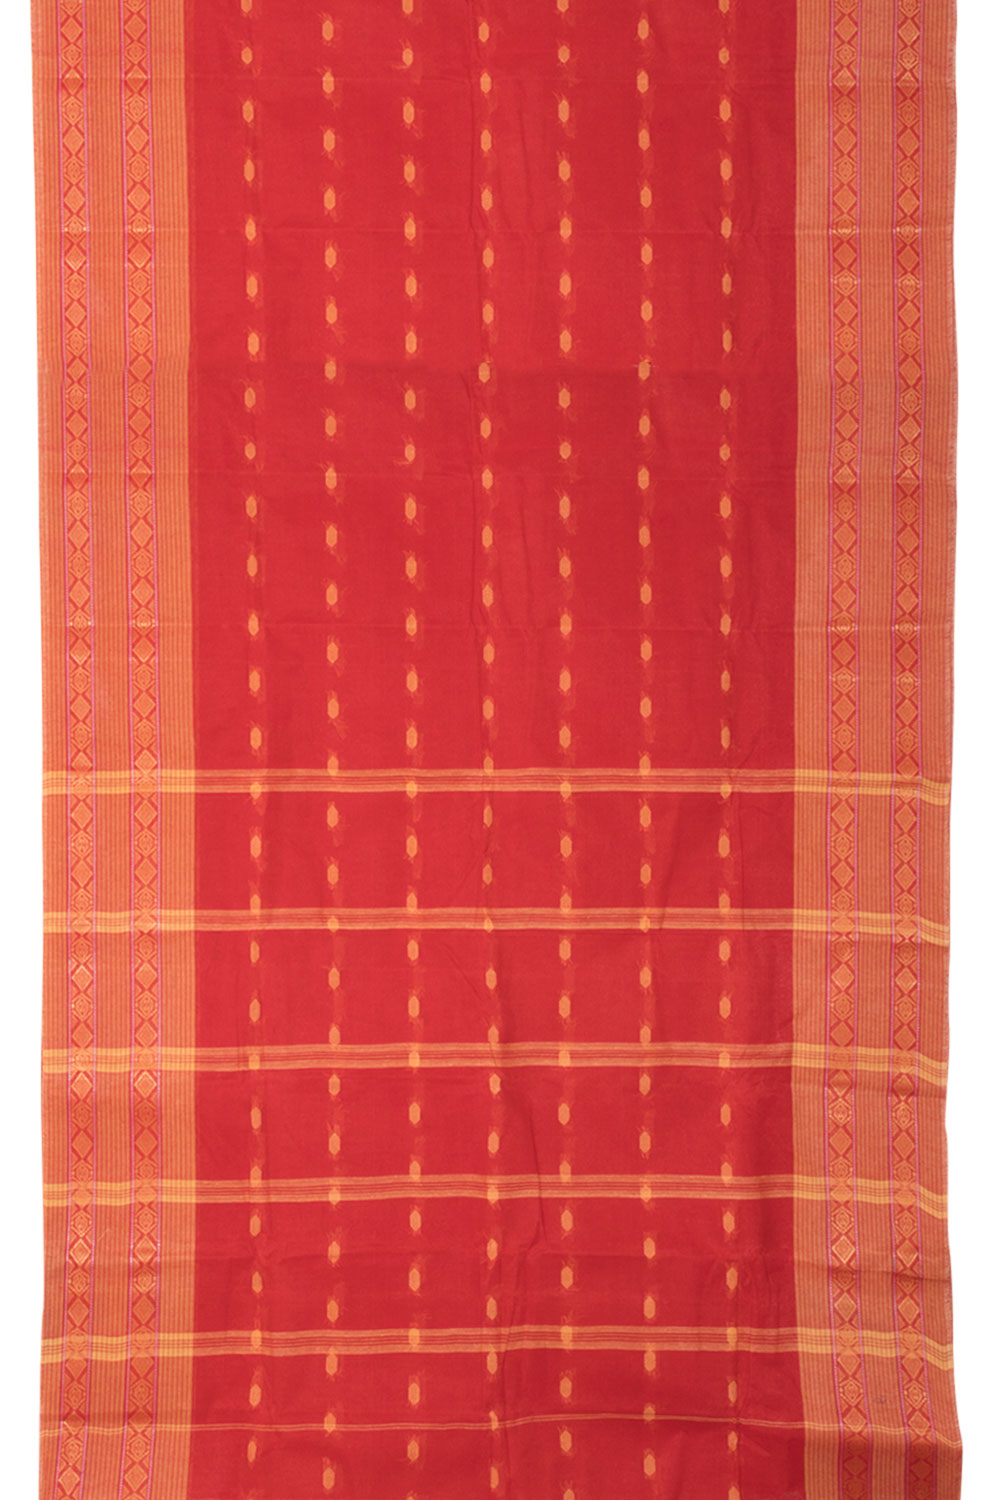 Candy Apple Red Bengal Tant Cotton Saree 10058884